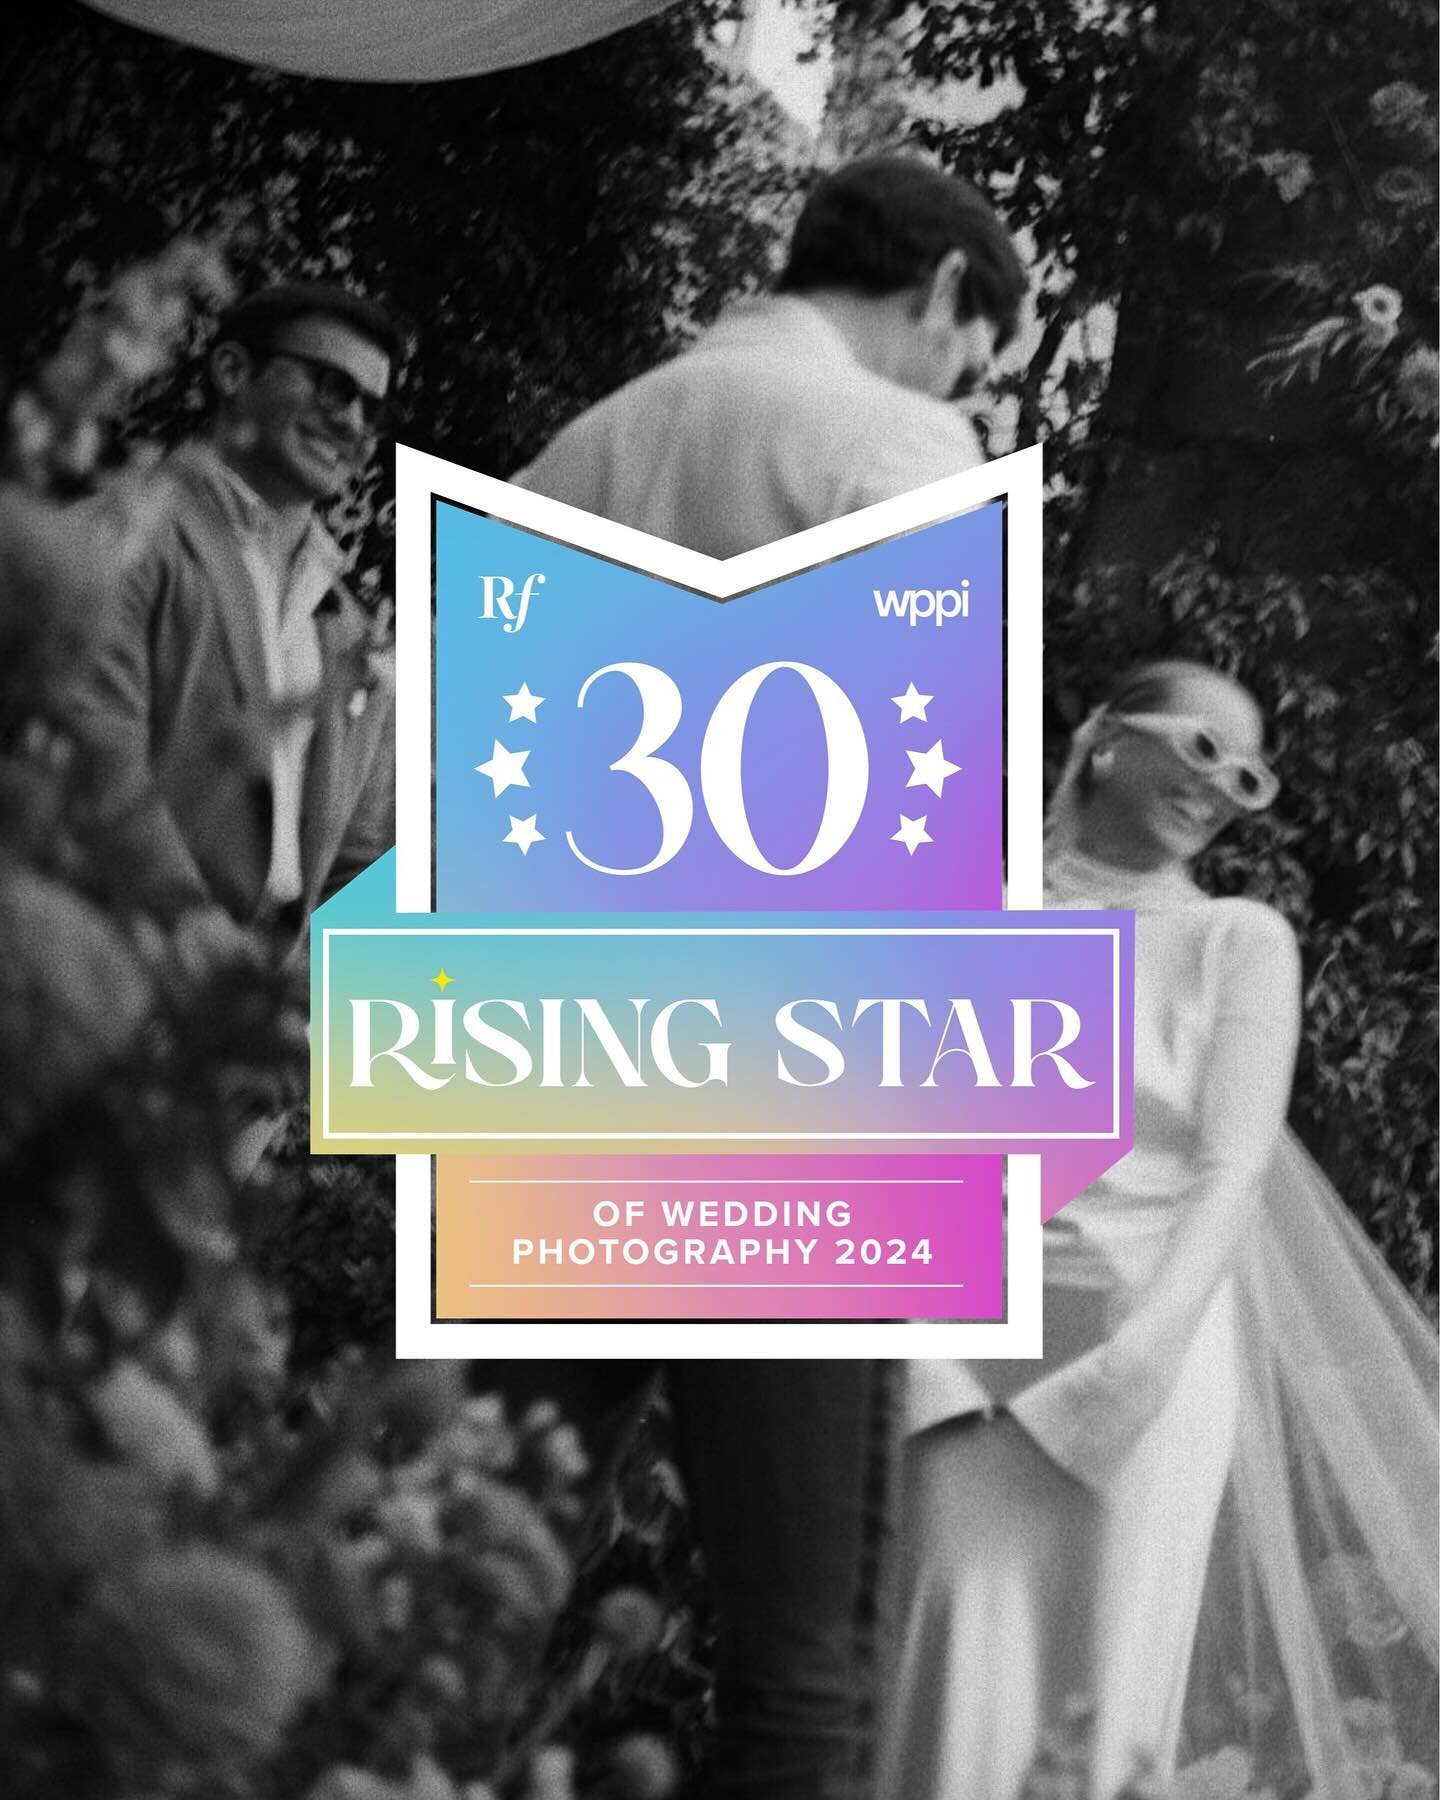 I&rsquo;m speechless. Since I started my wedding photography business I had the goal of becoming a Rangefinder&rsquo;s 30 Rising Star, one of the most competitive and prestigious award in the wedding photography industry. 

I&rsquo;ve always dreamed 